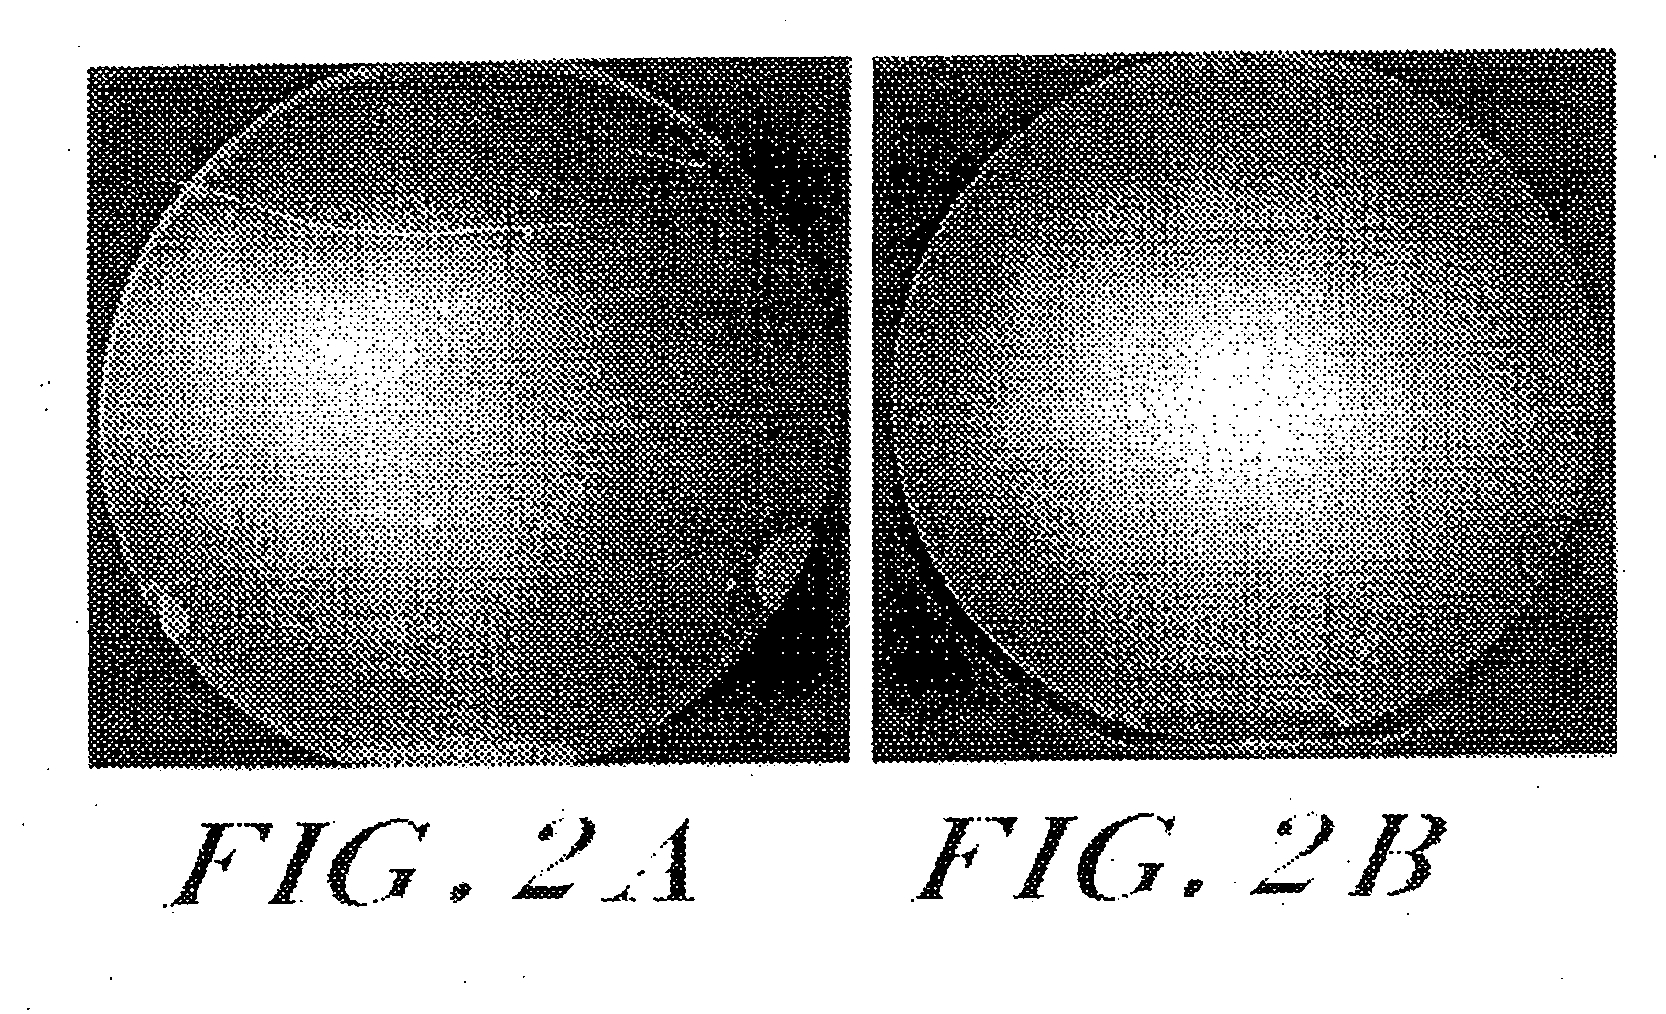 Process for producing semiconductor article using graded epitaxial growth